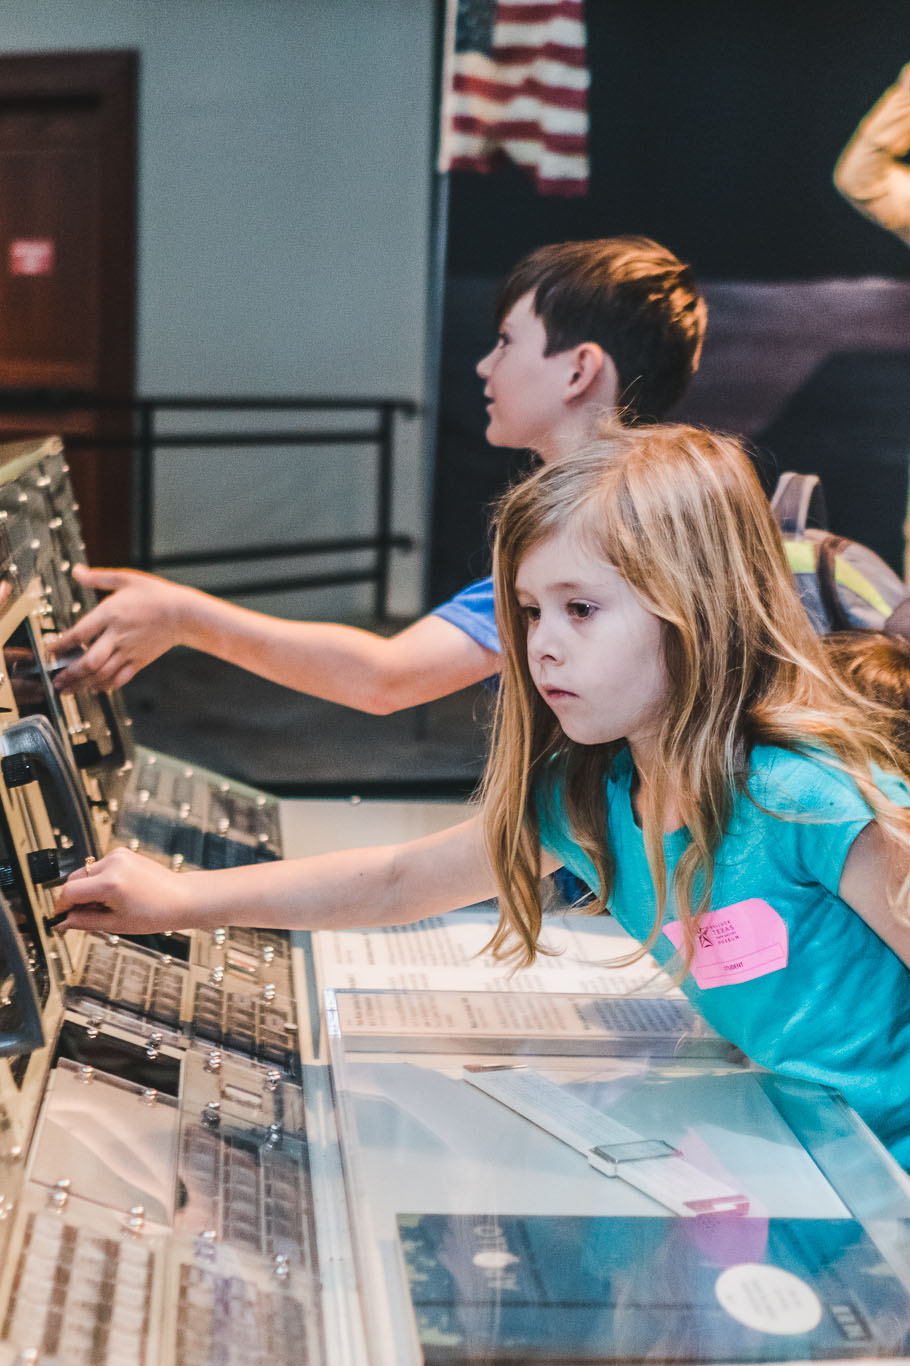 Young girl interacting with mission control model